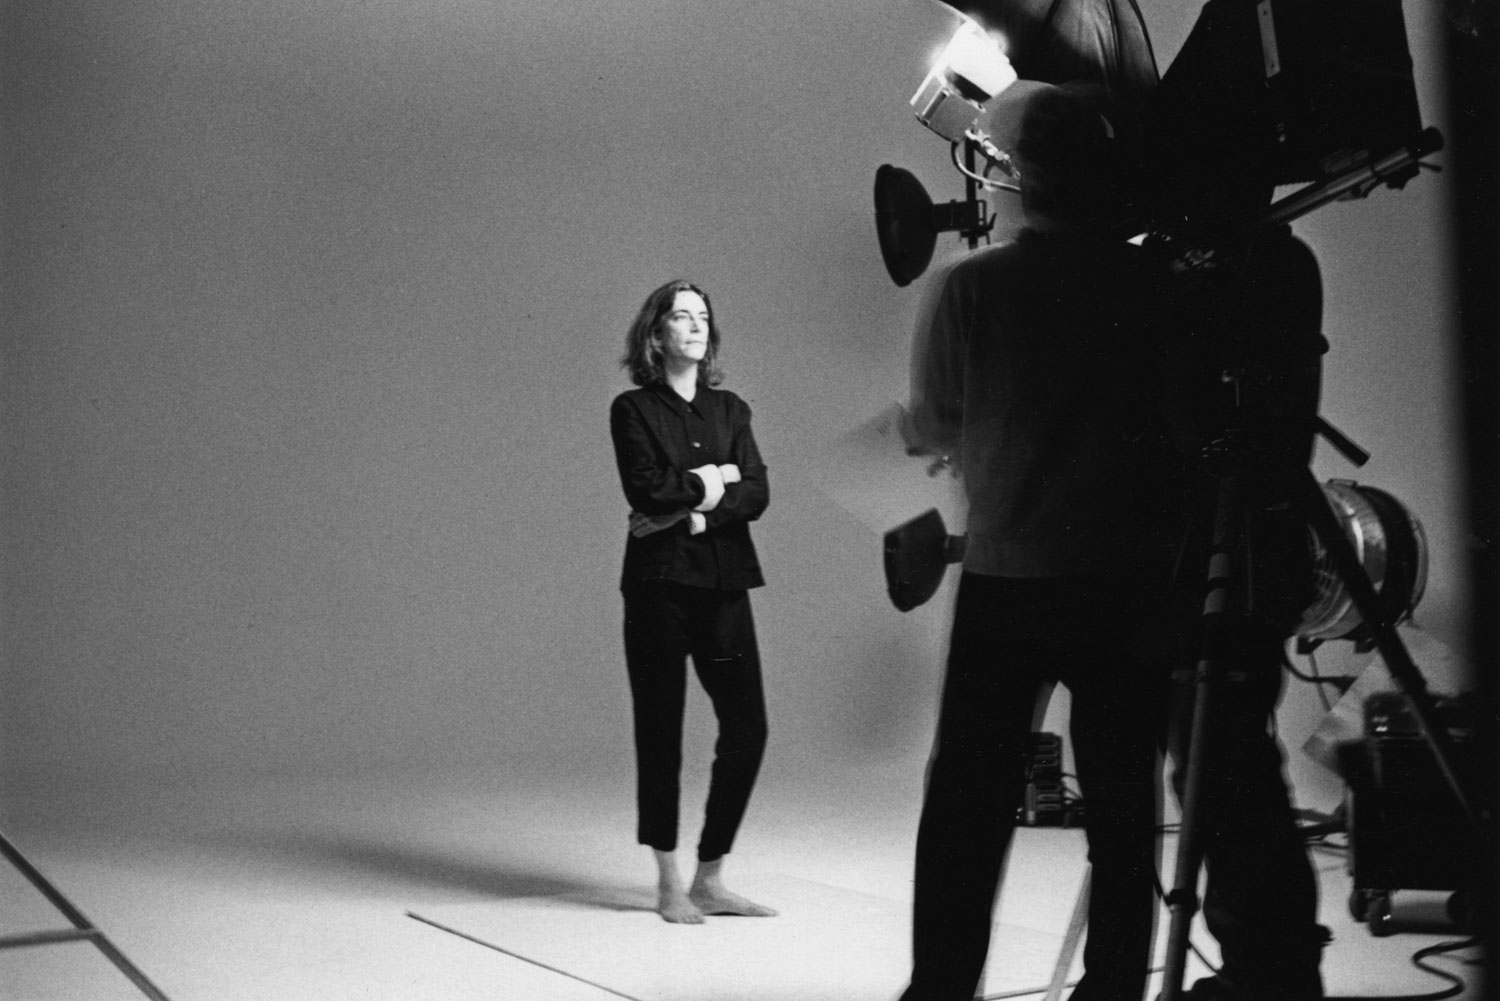 Smith being photographed by Richard Avedon for The New Yorker, 1998